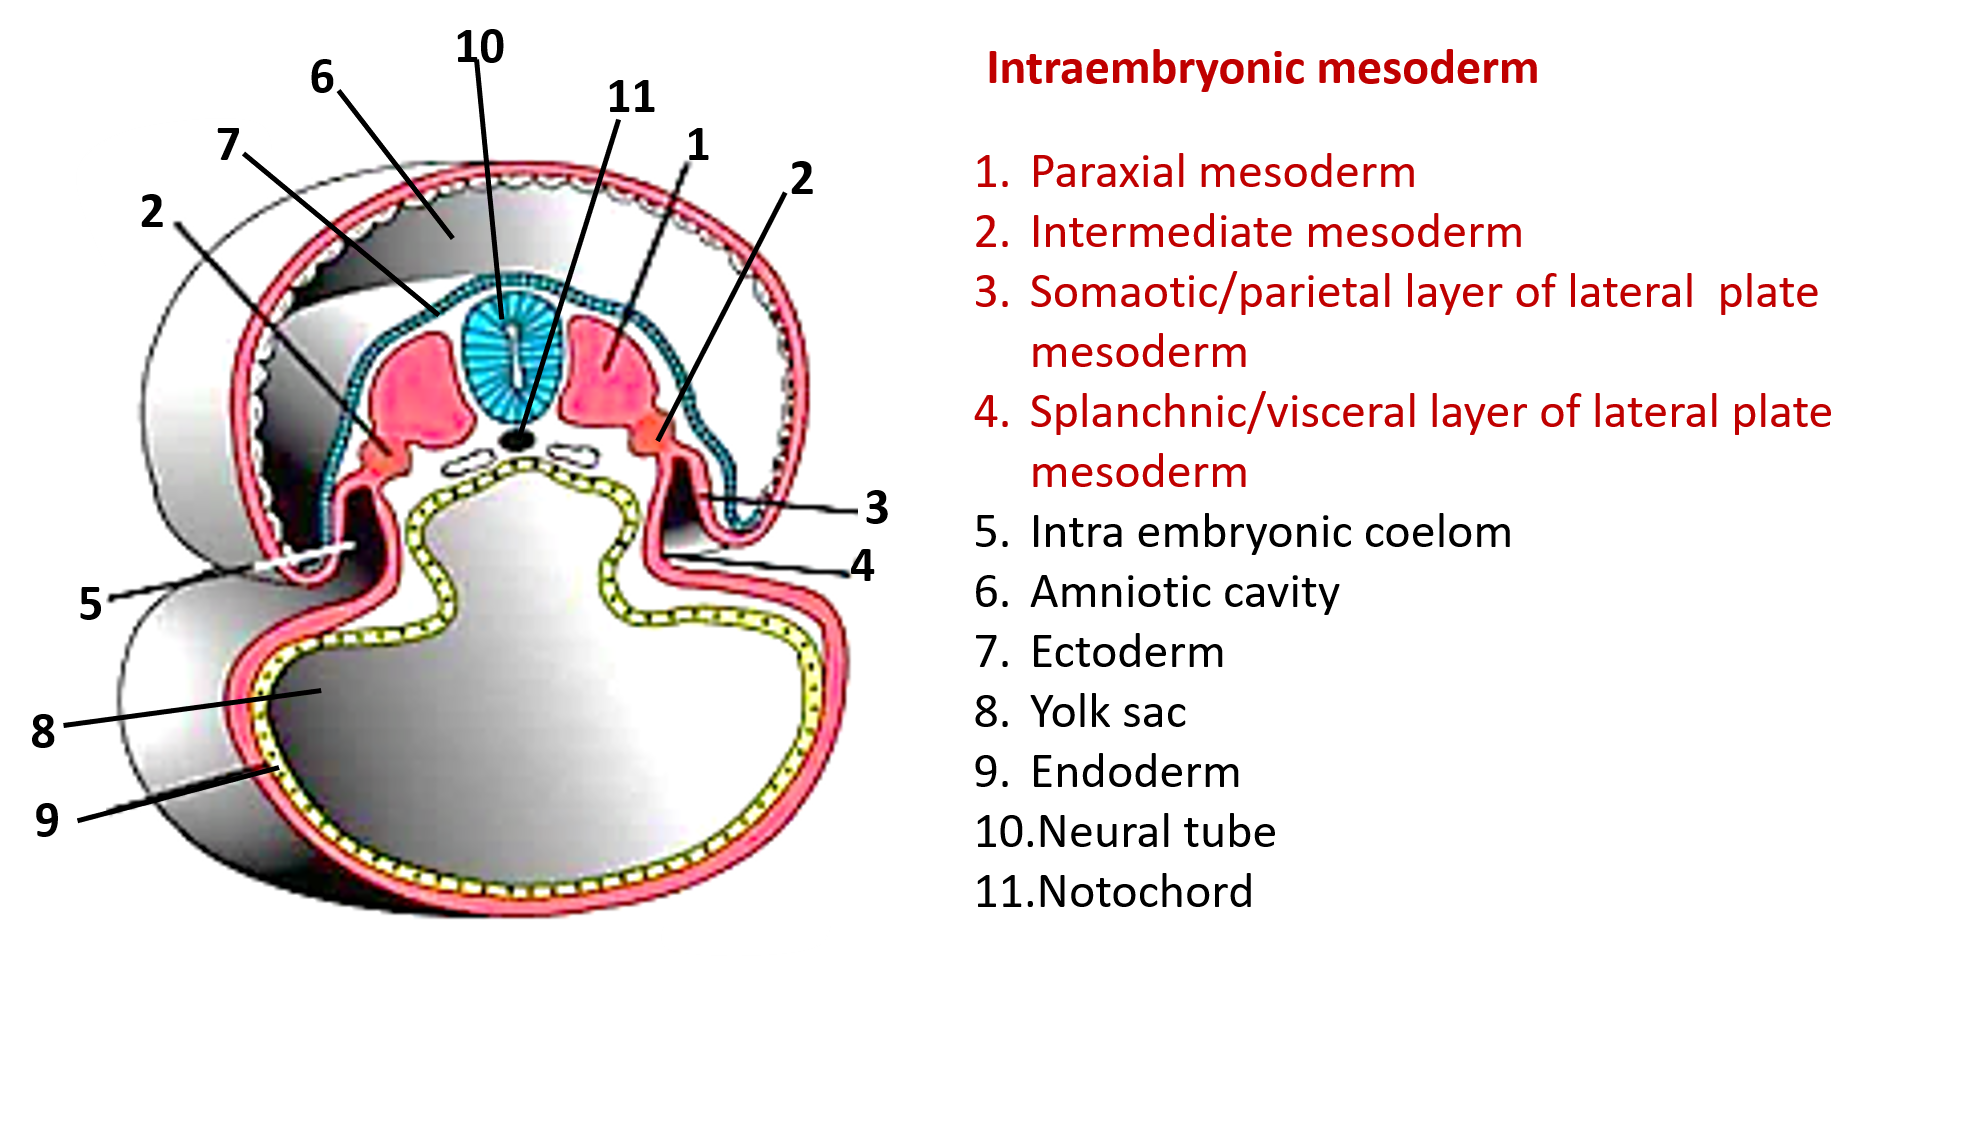 Divisions of intraembryonic mesoderm